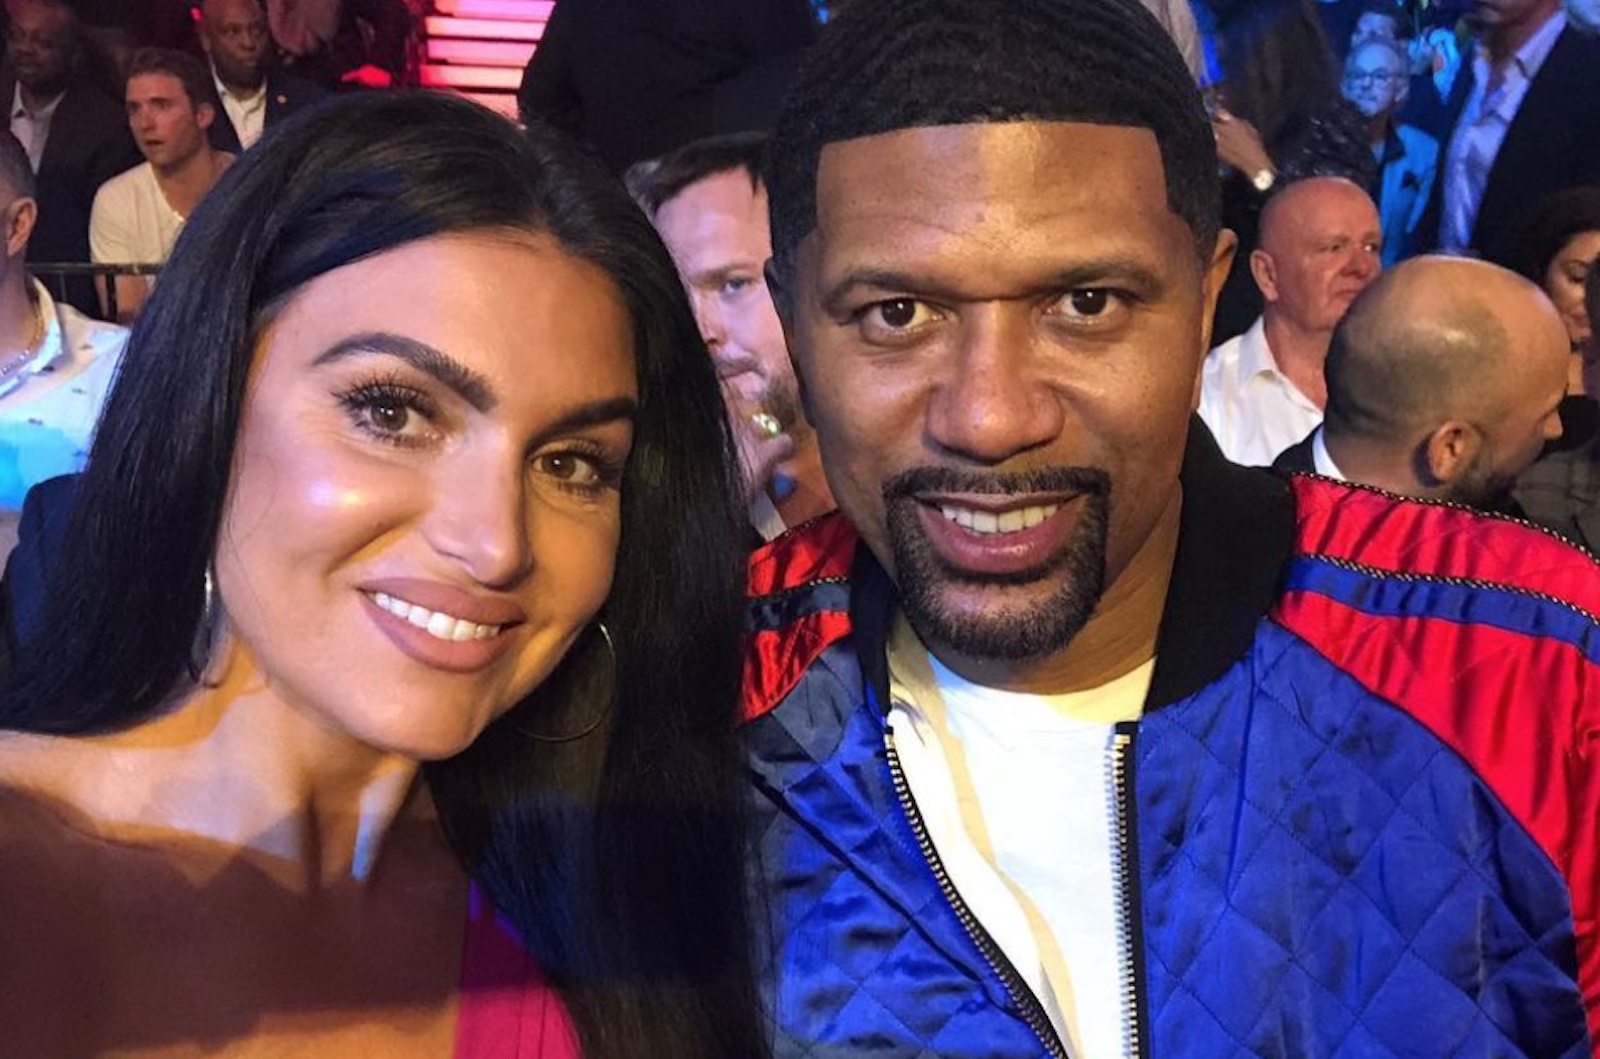 Rise wife. Molly Rose. Molly Qerim. Molly Qerim hot. Jalen Rose pictures.